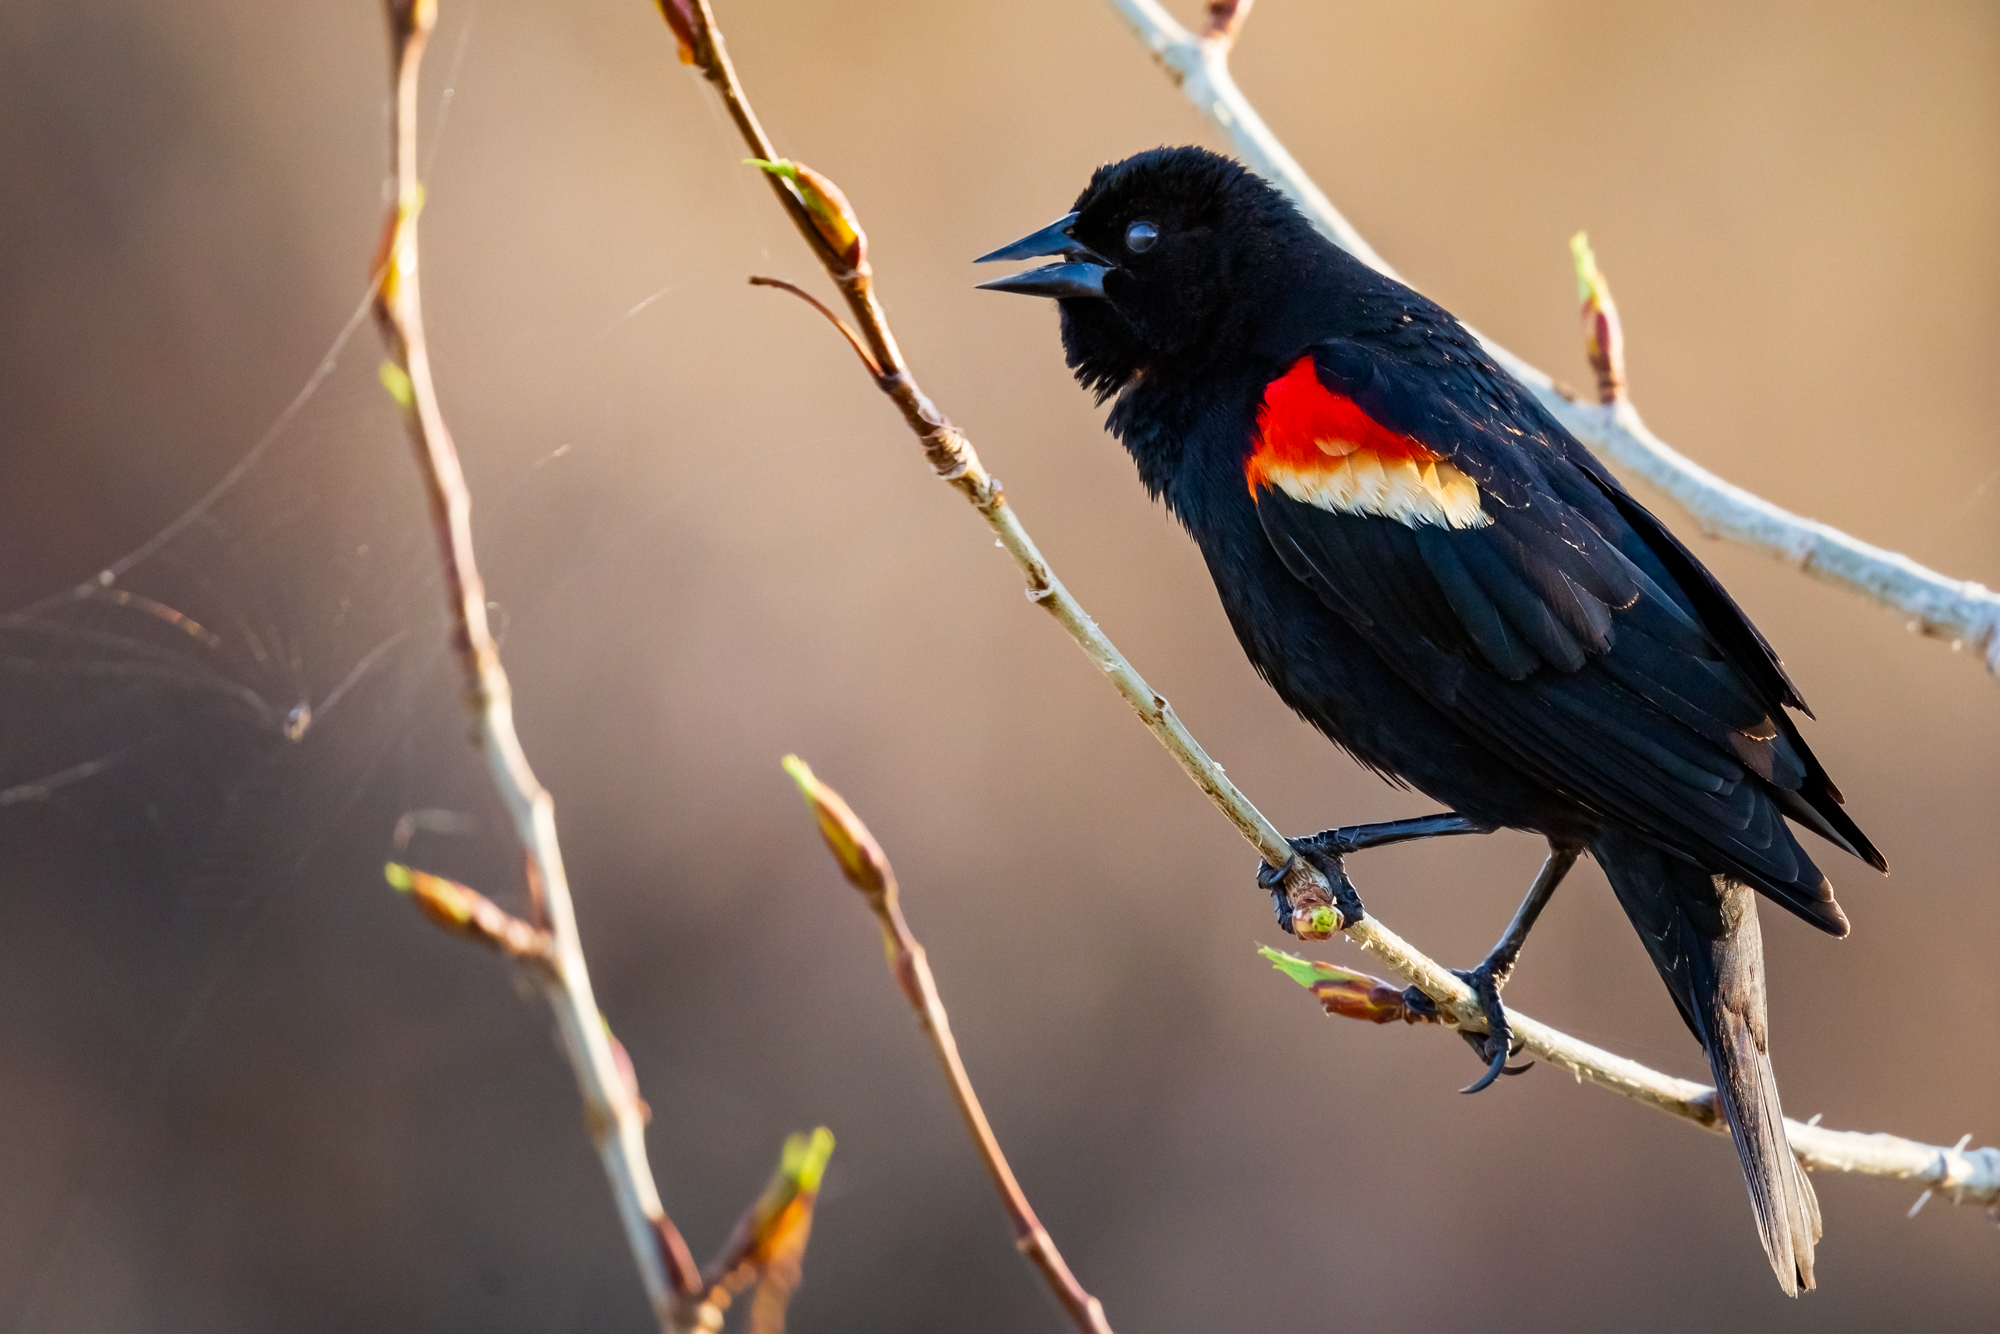 Red-winged Blackbird sitting on branches that the leaves are just starting to open